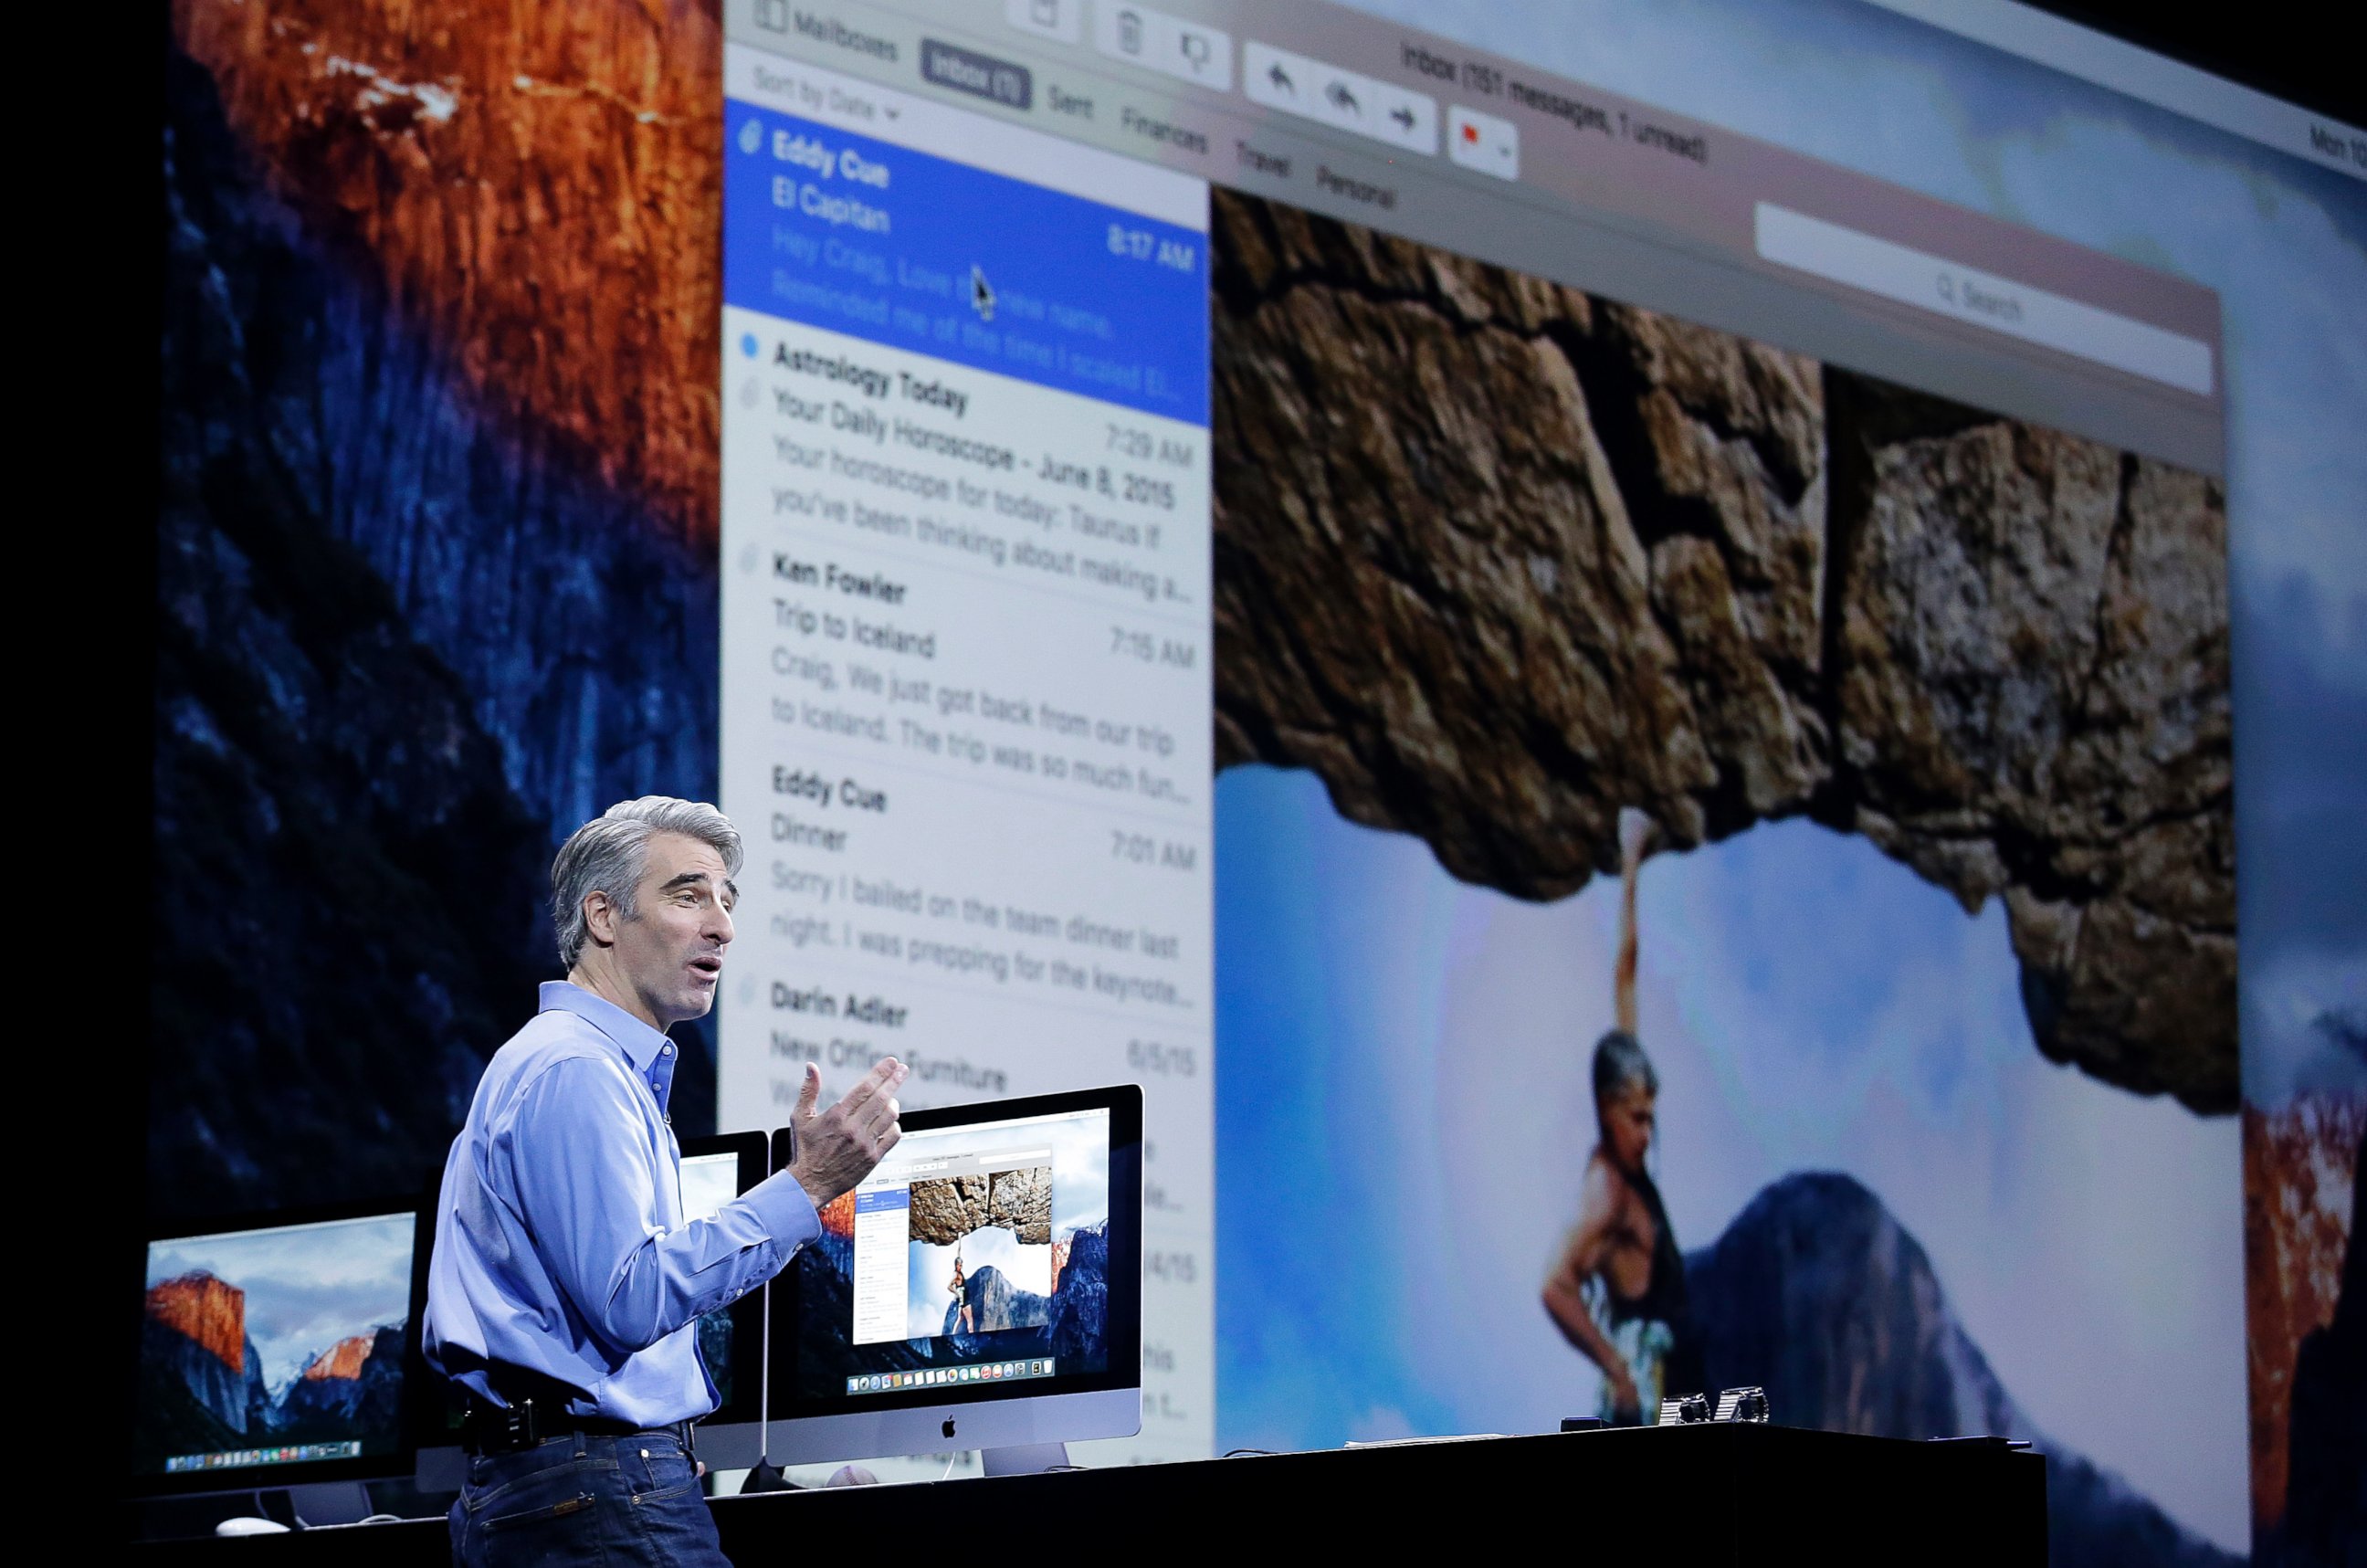 PHOTO: Craig Federighi, Apple senior vice president of Software Engineering, talks about the El Capitan operating system at the Apple Worldwide Developers Conference in San Francisco, June 8, 2015.